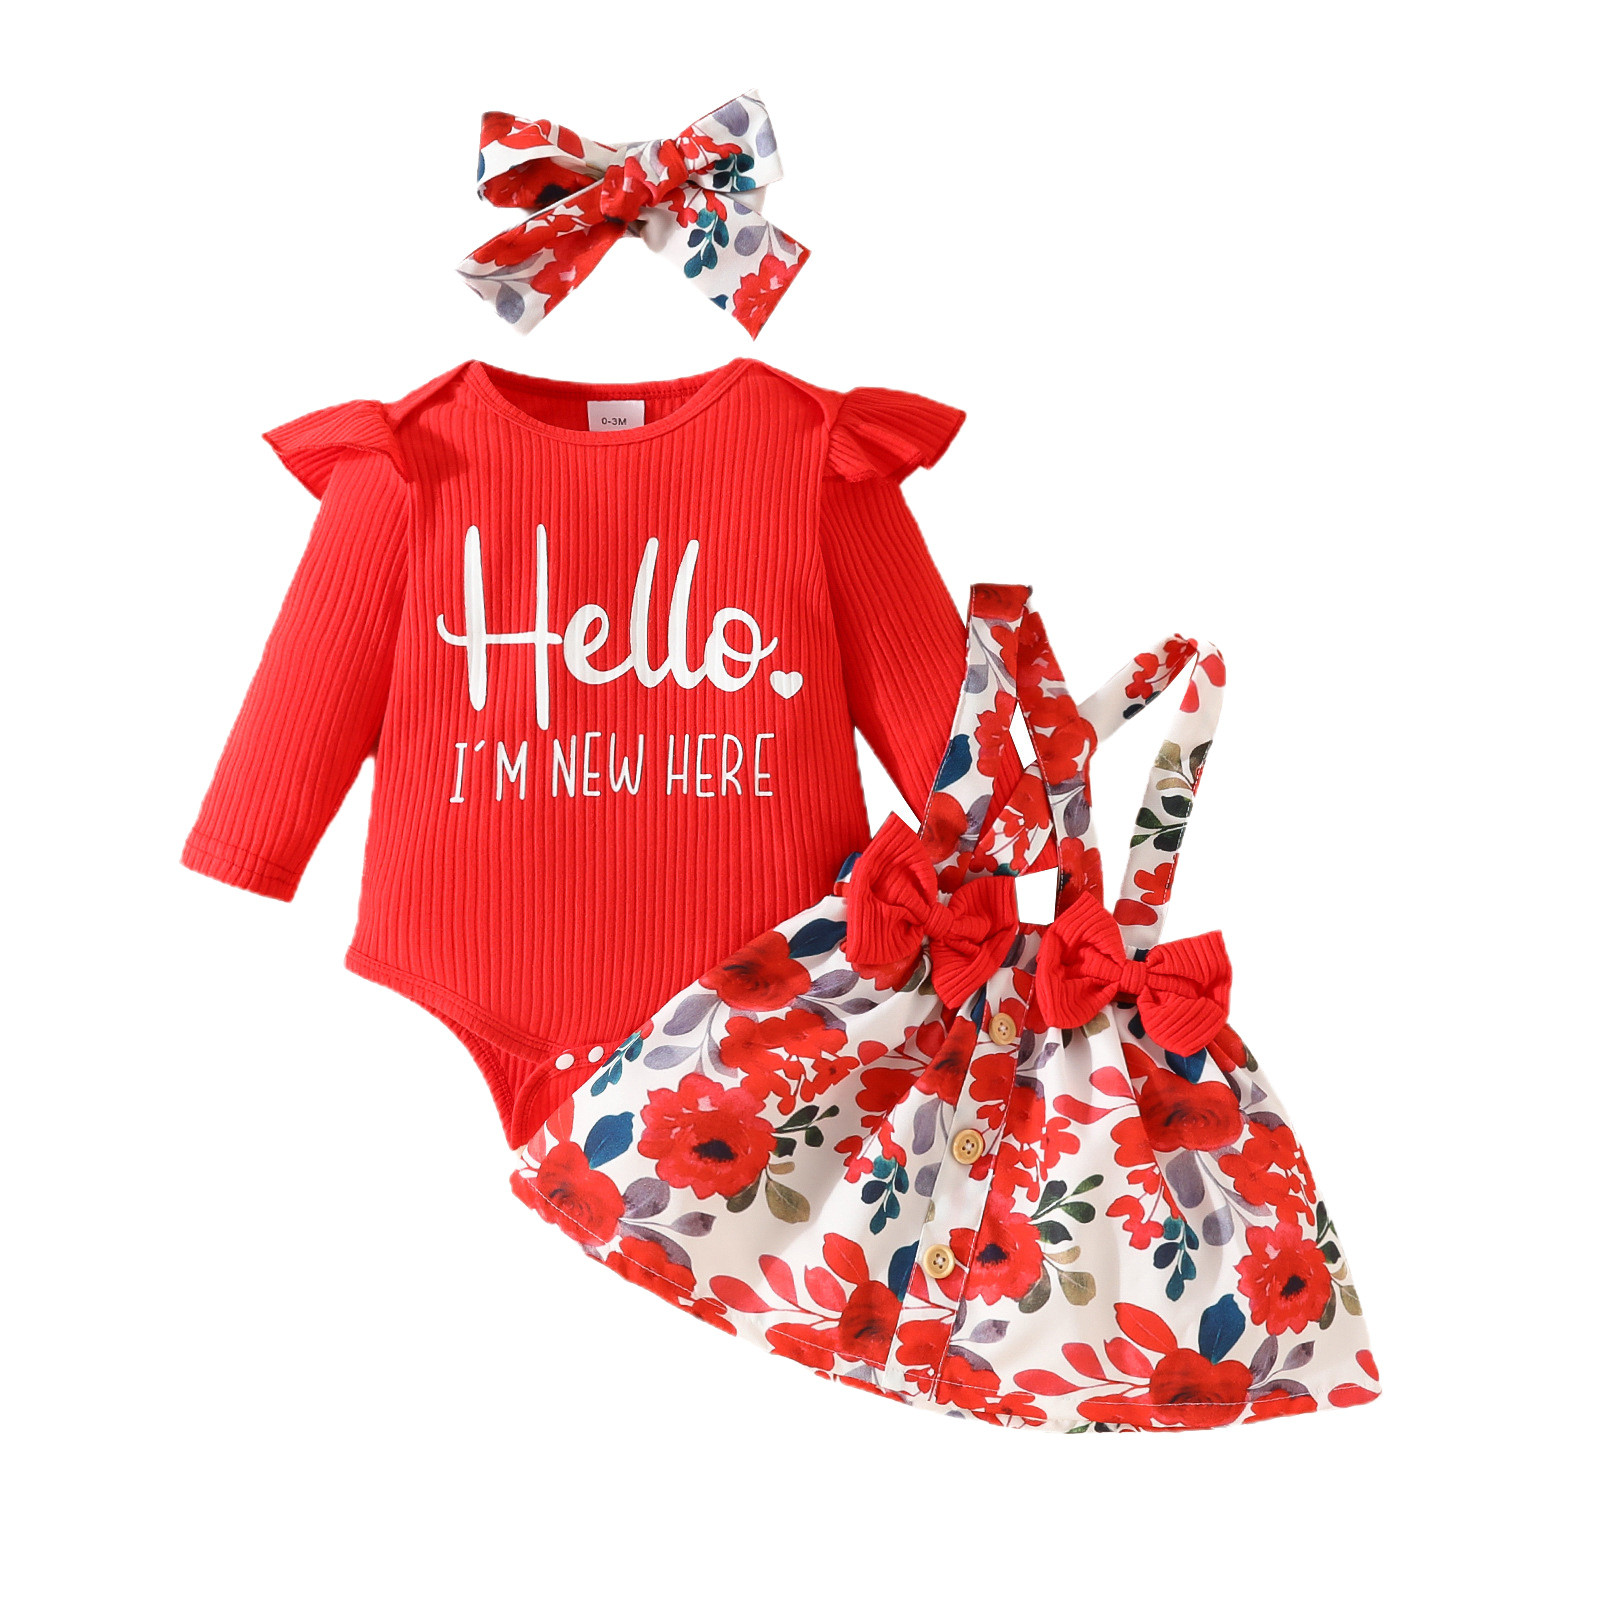 Baby Girls Outfit Long Sleeve Letter Print Tops Floral Peints Skirts ...